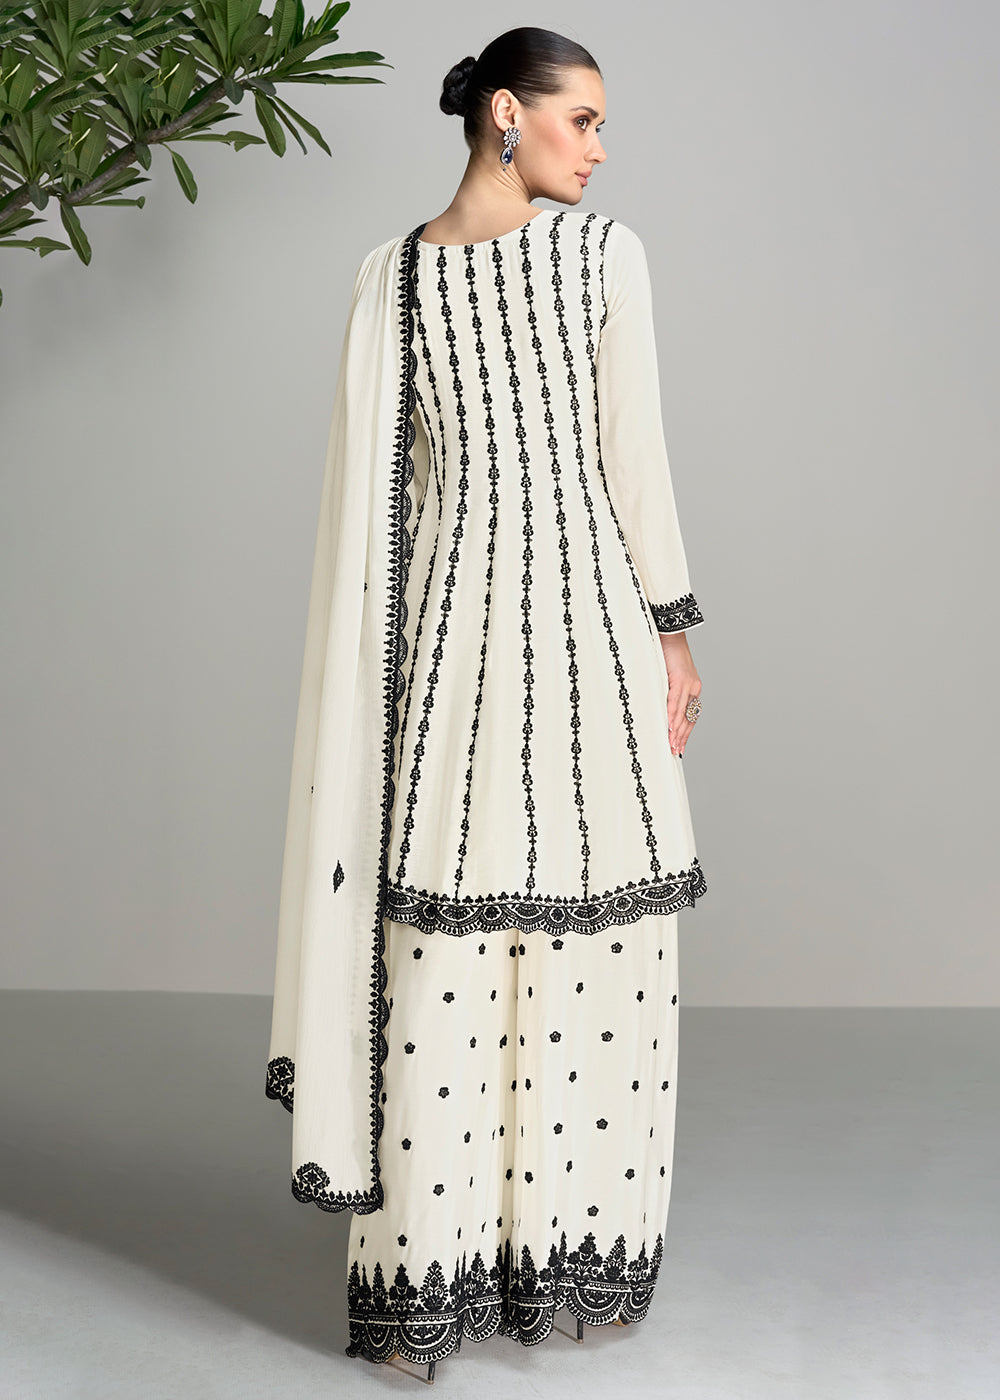 Buy Now Embroidered Off White Chinnon Wedding Festive Palazzo Suit Online in USA, UK, Canada, Germany, Australia & Worldwide at Empress Clothing.